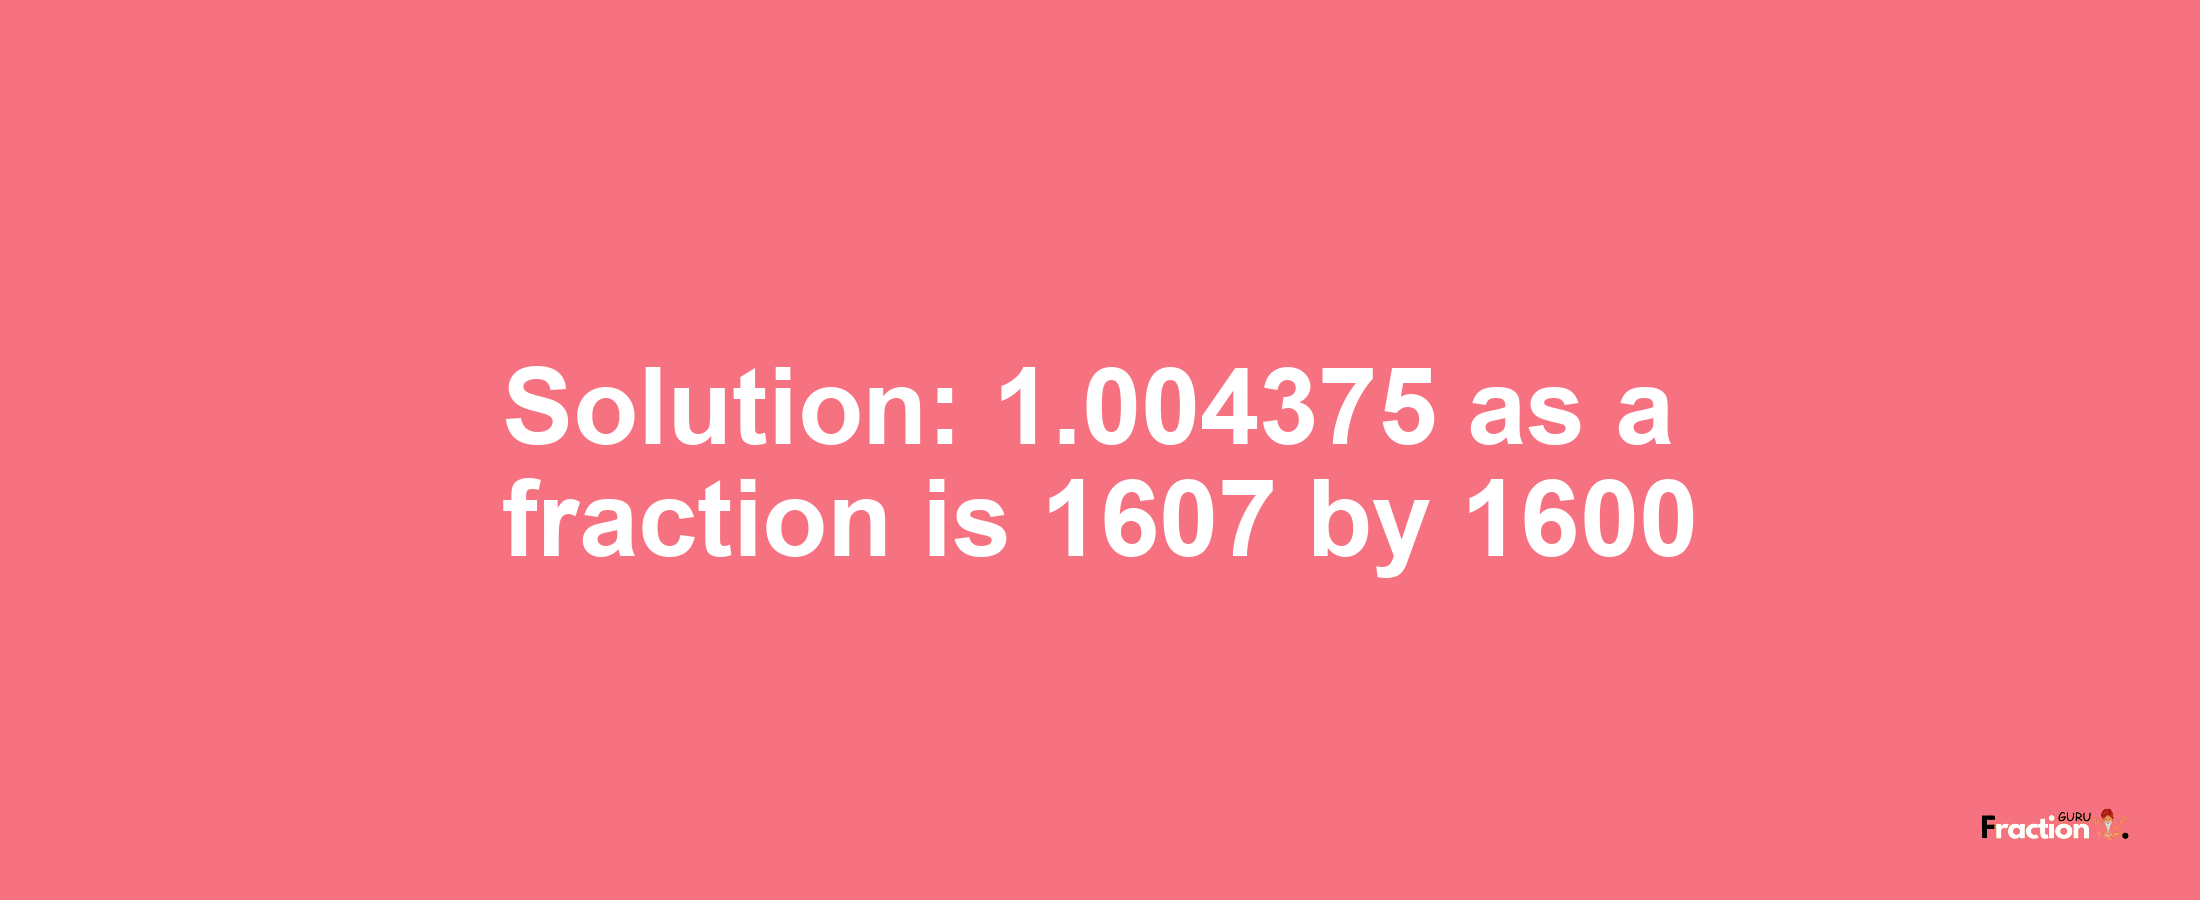 Solution:1.004375 as a fraction is 1607/1600